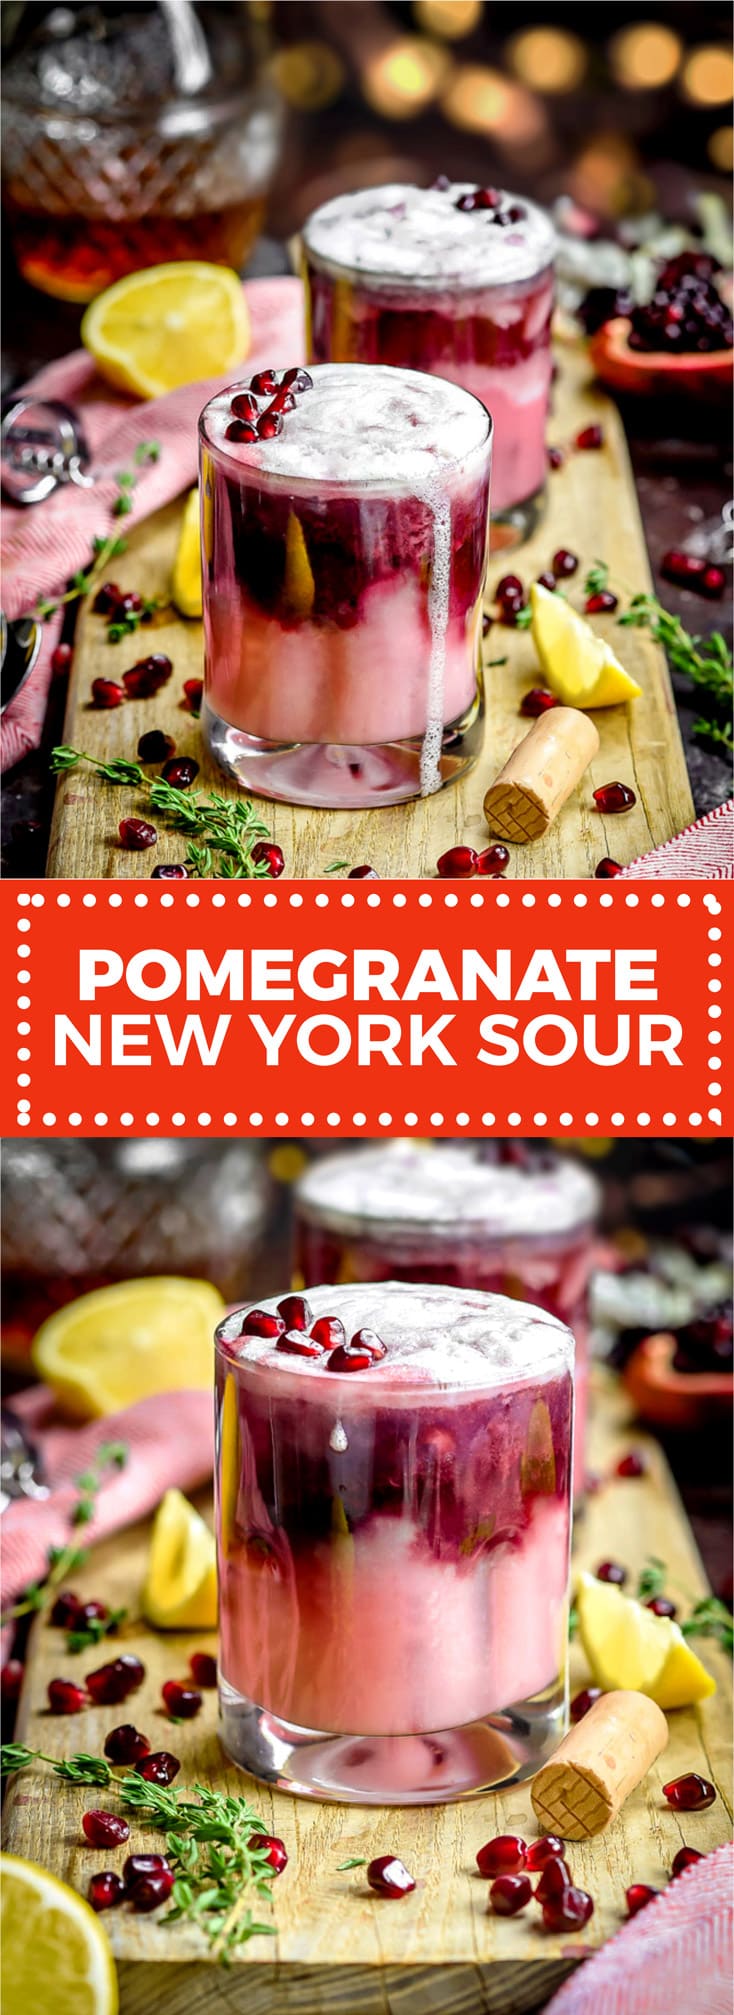 Pomegranate New York Sour. This tart and sweet whiskey cocktail features a red wine float and gorgeously pink, pomegranate-spiked base. It's the perfect cocktail for Valentine's Day, and while it looks impressive and professional, even a cocktail novice can whip it together. | hostthetoast.com